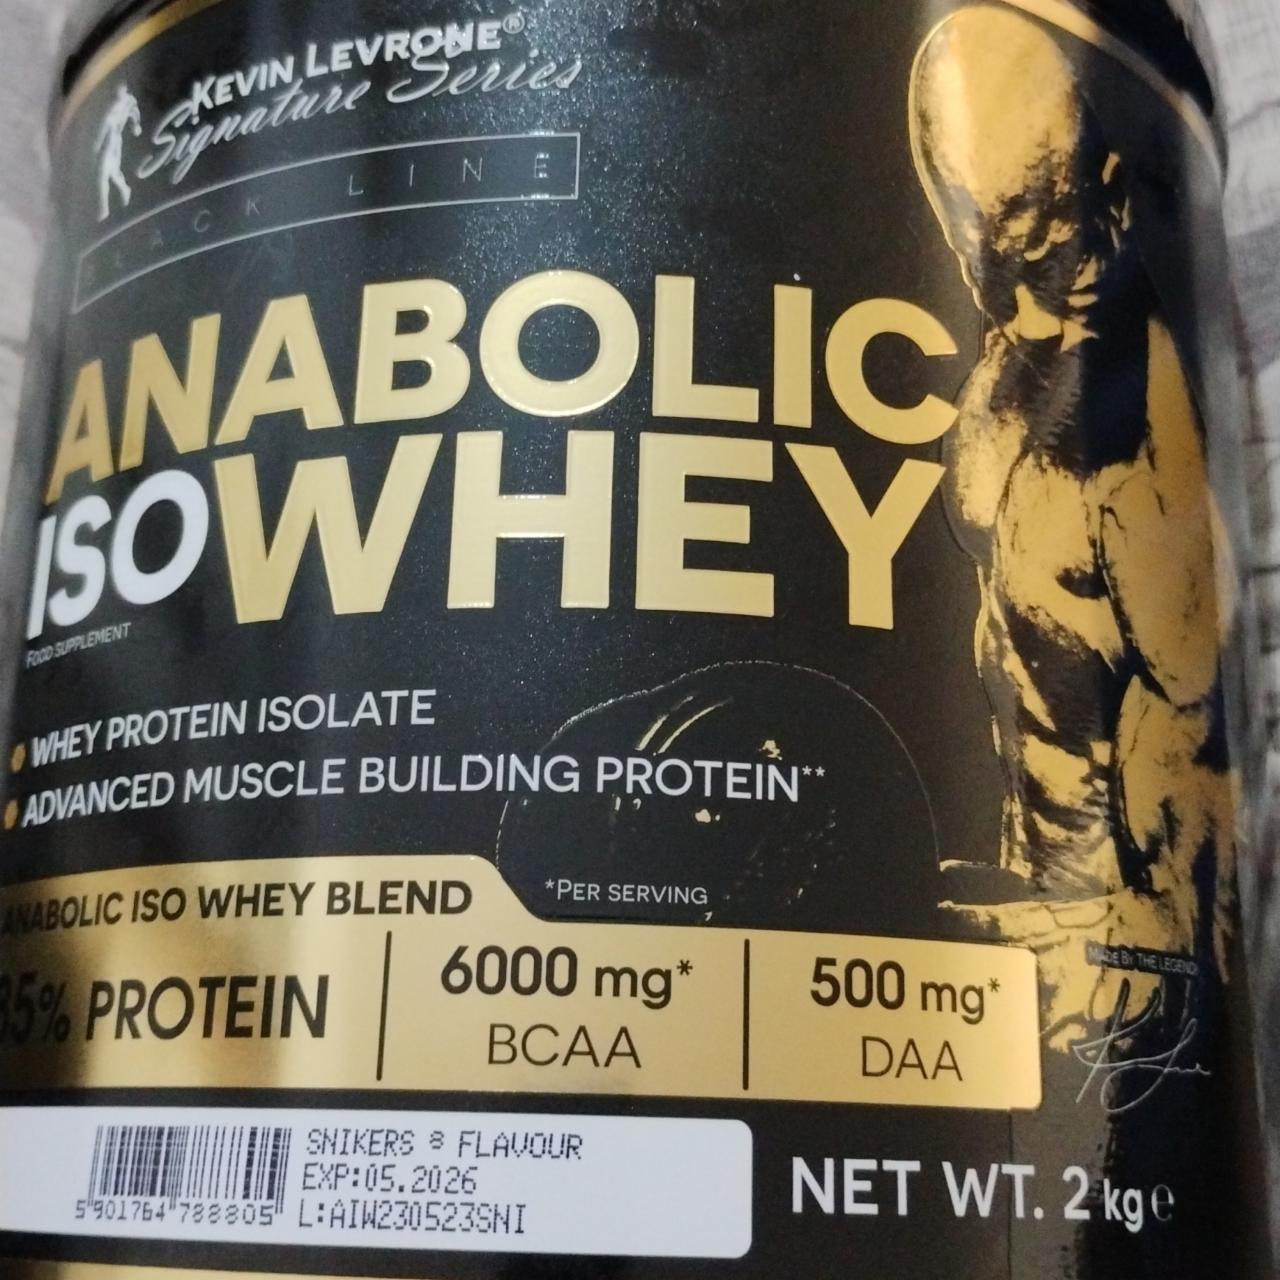 Fotografie - Anabolic ISO whey Snickers Kevin Levrone